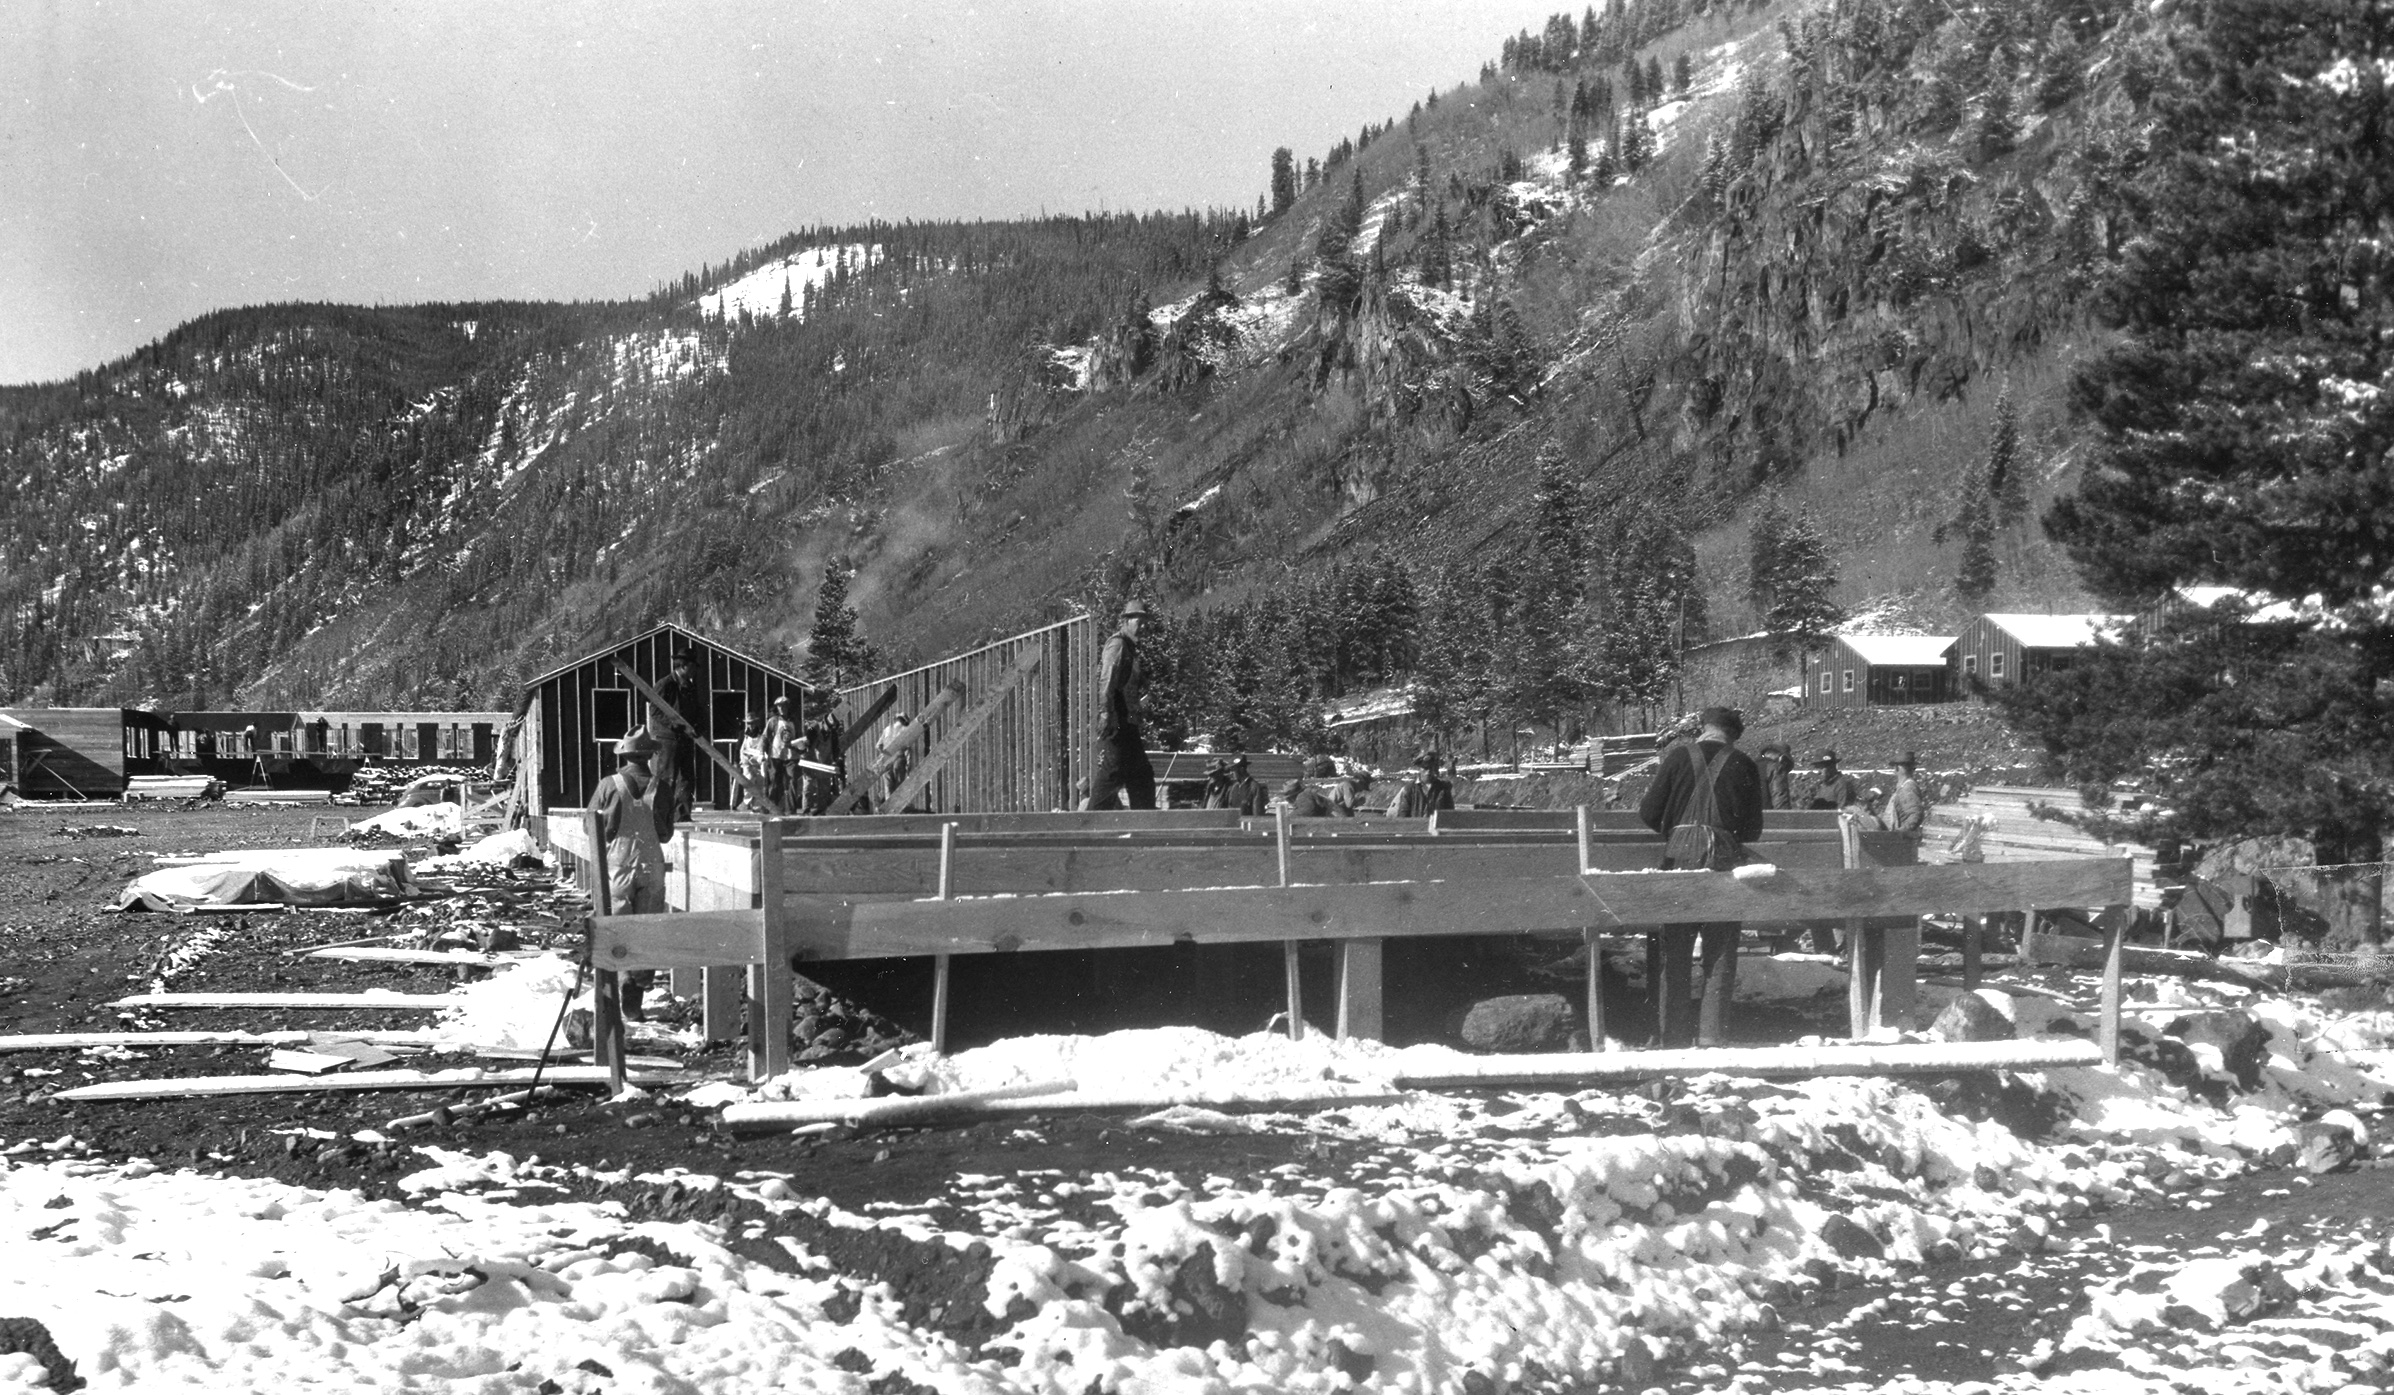 Workers constructing a structure in Camp Hale.